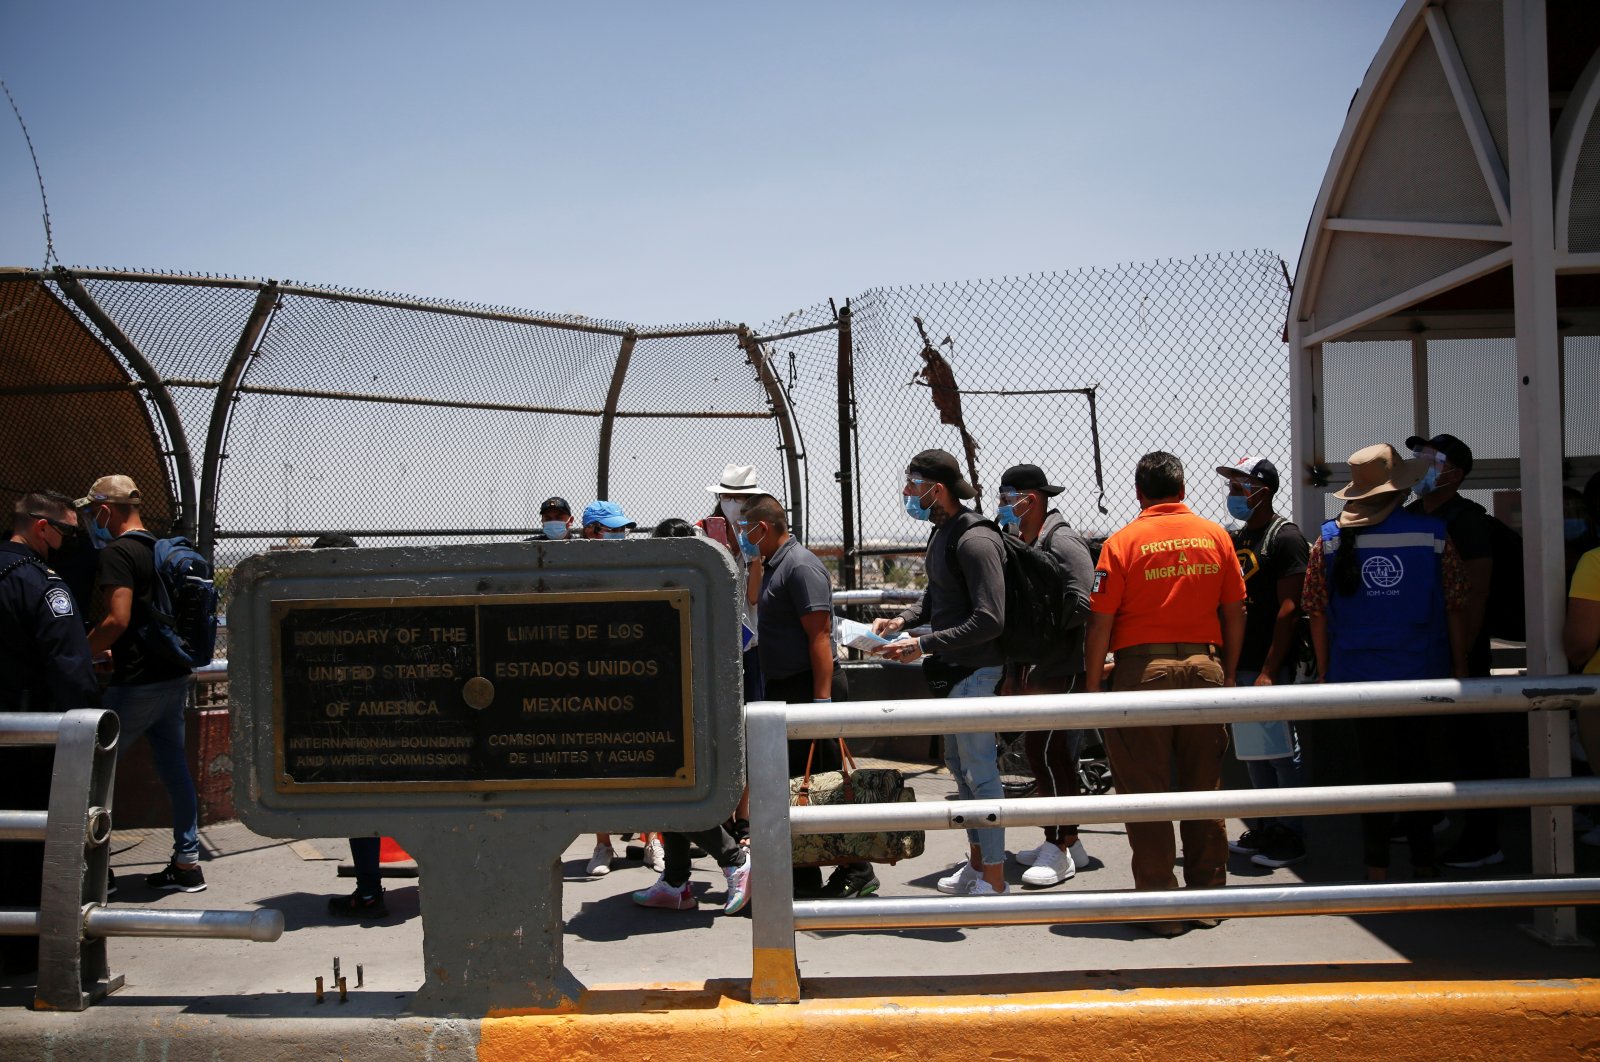 Asylum-seekers, under the Migrant Protection Protocols (MPP) program, walk across the Paso del Norte international border bridge from the Mexican side to continue their asylum request in the United States, in Ciudad Juarez, Mexico, June 18, 2021. (Reuters Photo)